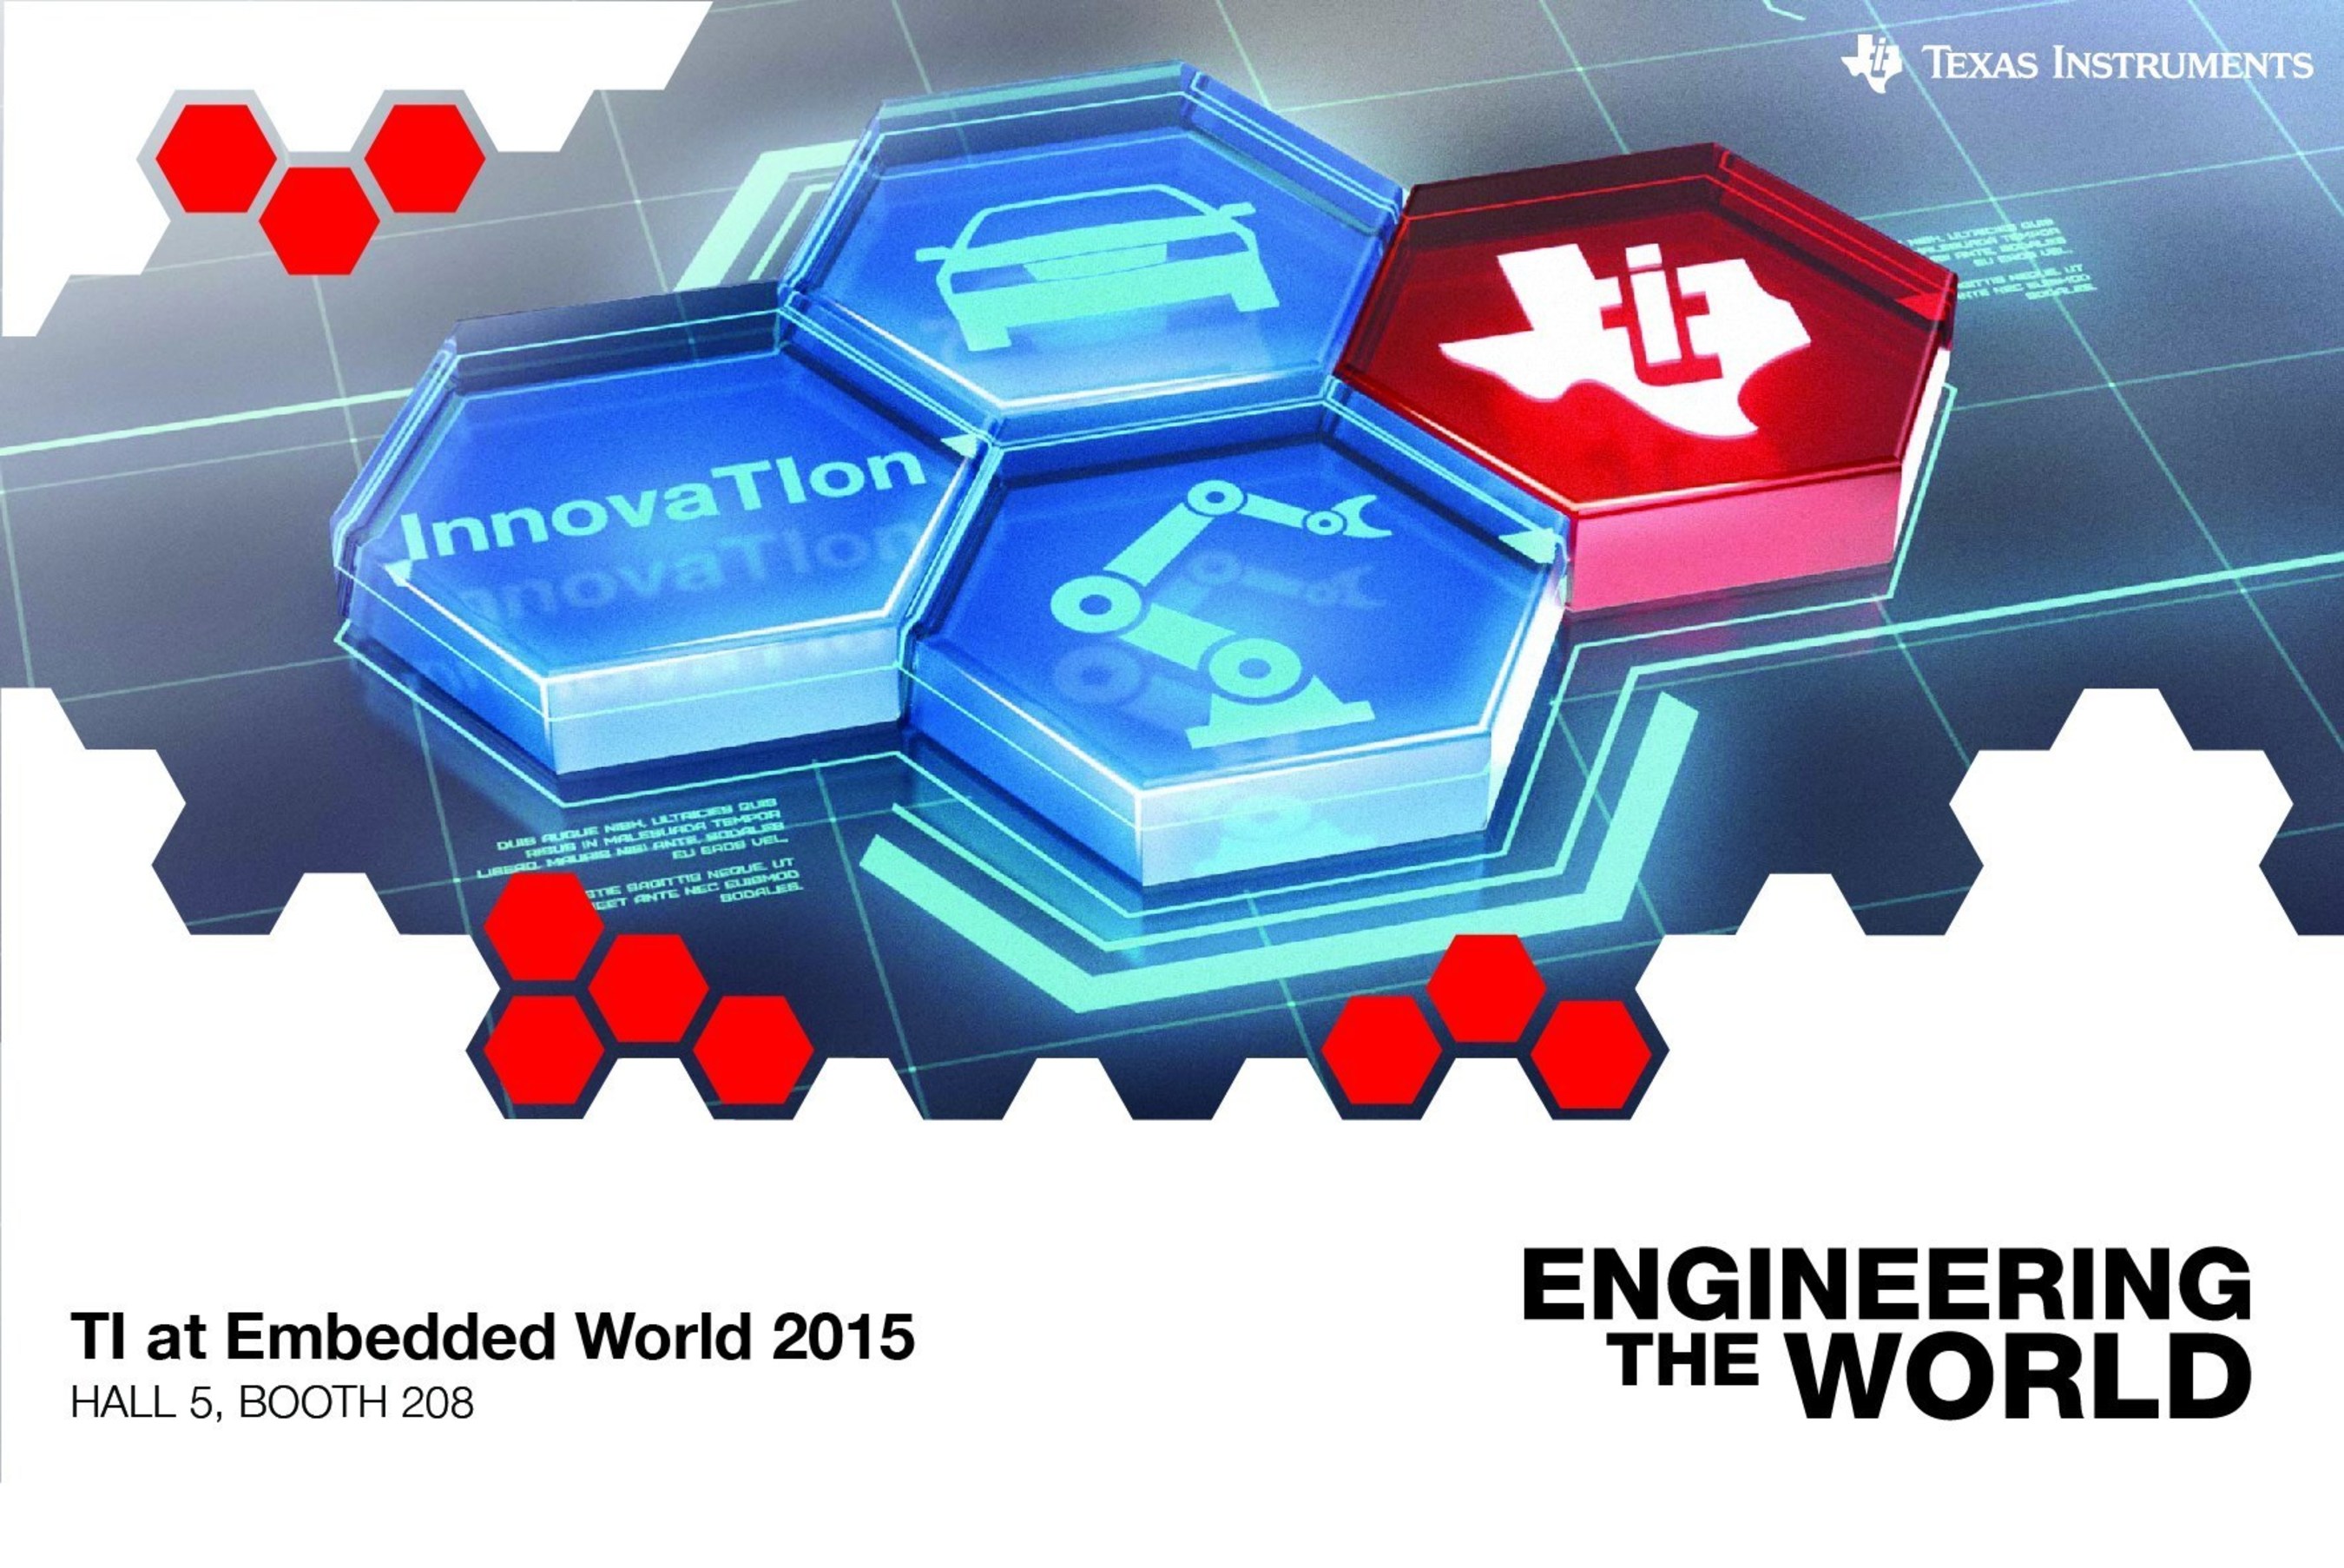 TI to drive innovation for IoT, industrial and automotive applications at embedded world 2015